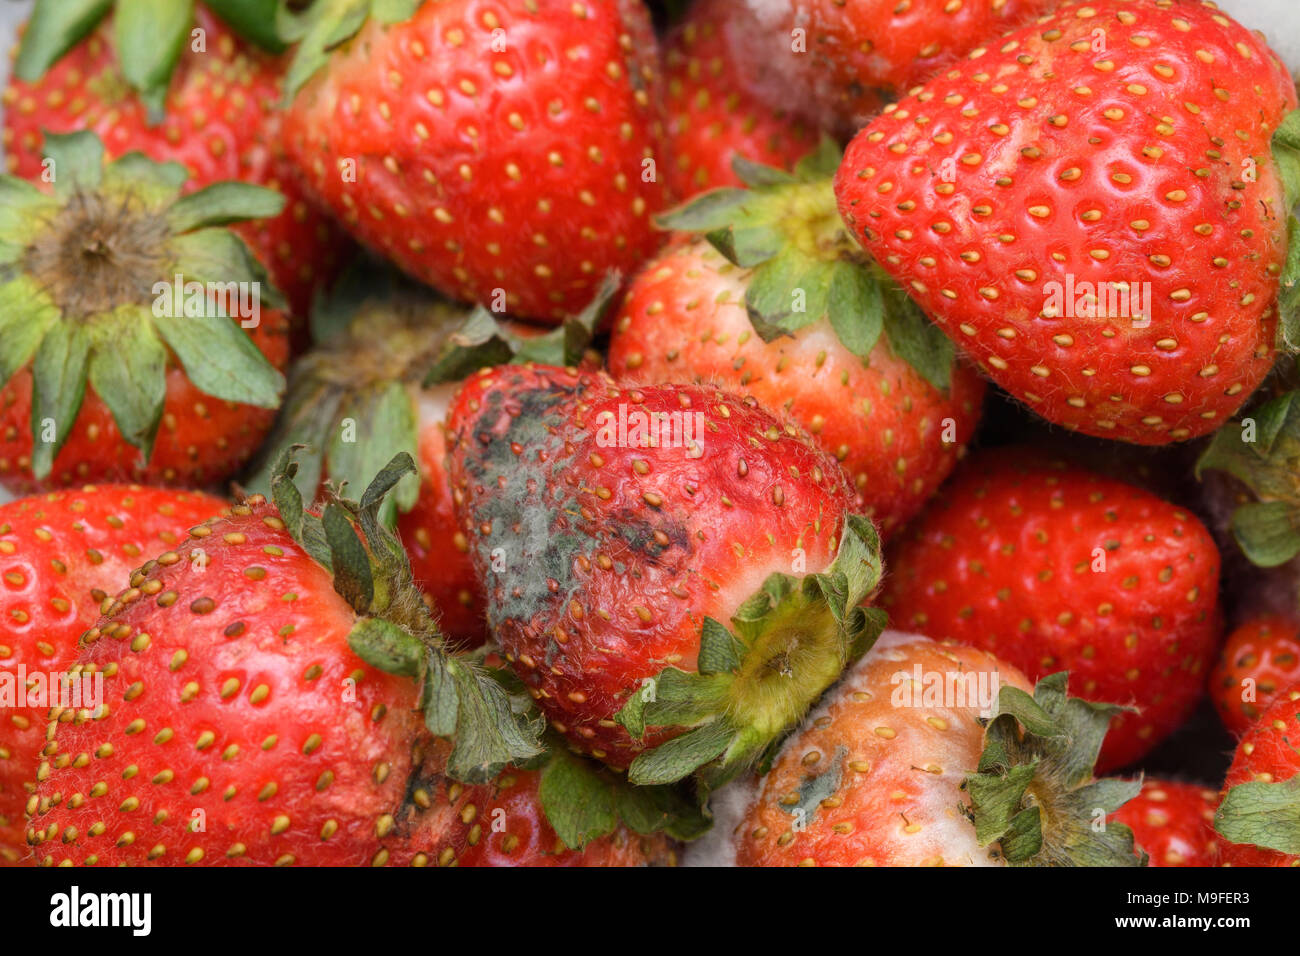 Rotten strawberry filled with thick mold. Stock Photo